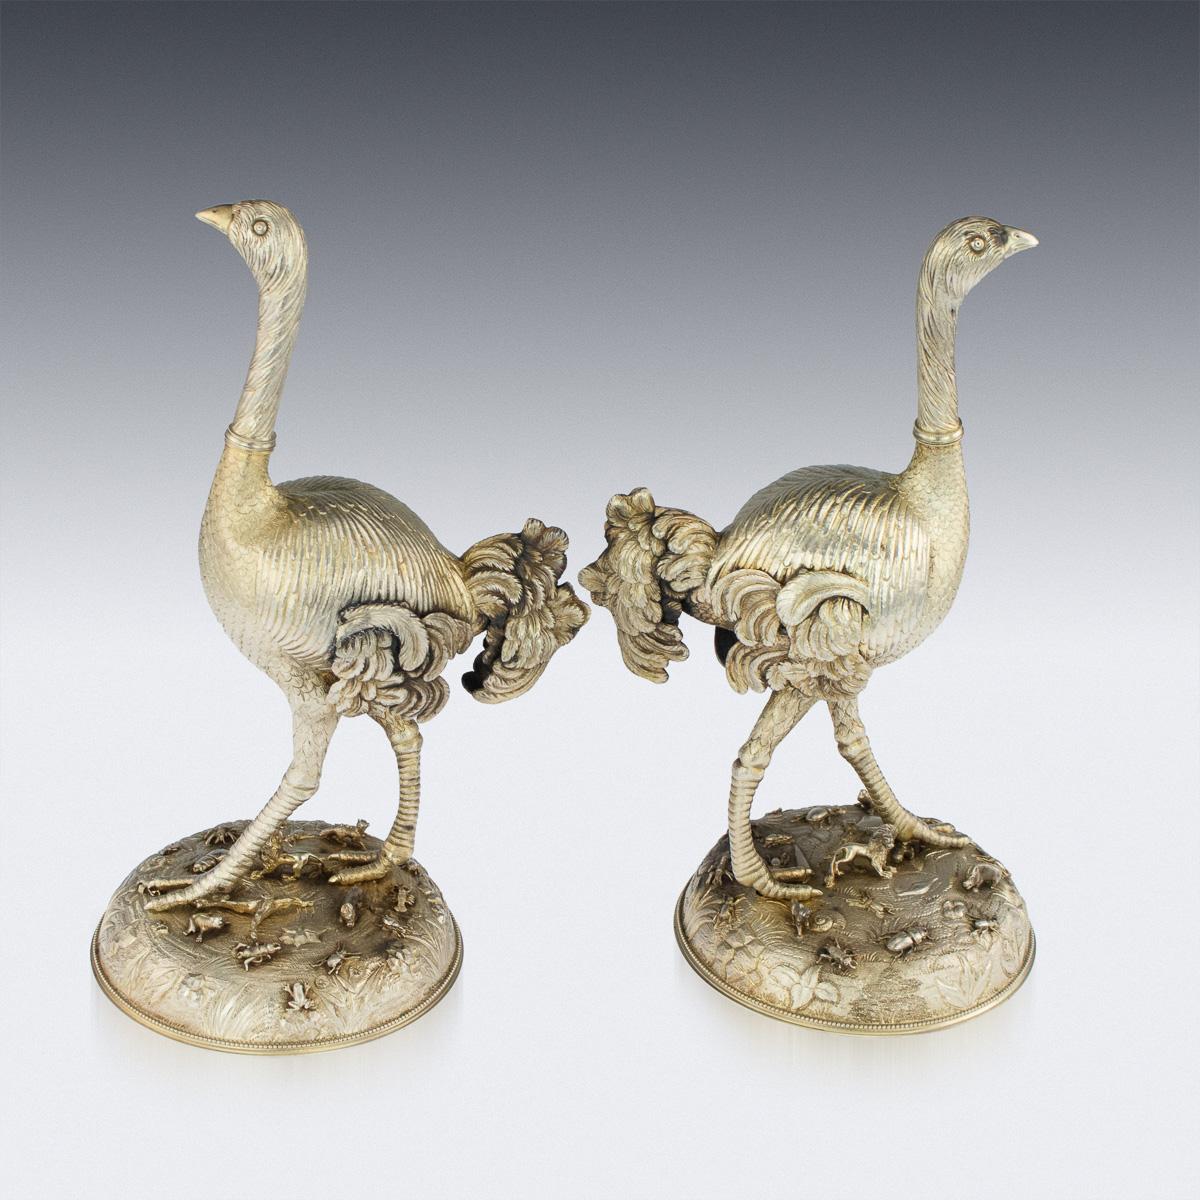 Antique mid-19th century German solid silver-gilt pair of figure modelled as ostriches. The figures with removable heads, are well-refined and are realistically engraved to the very last detail, the body applied with bushy wings and tail and